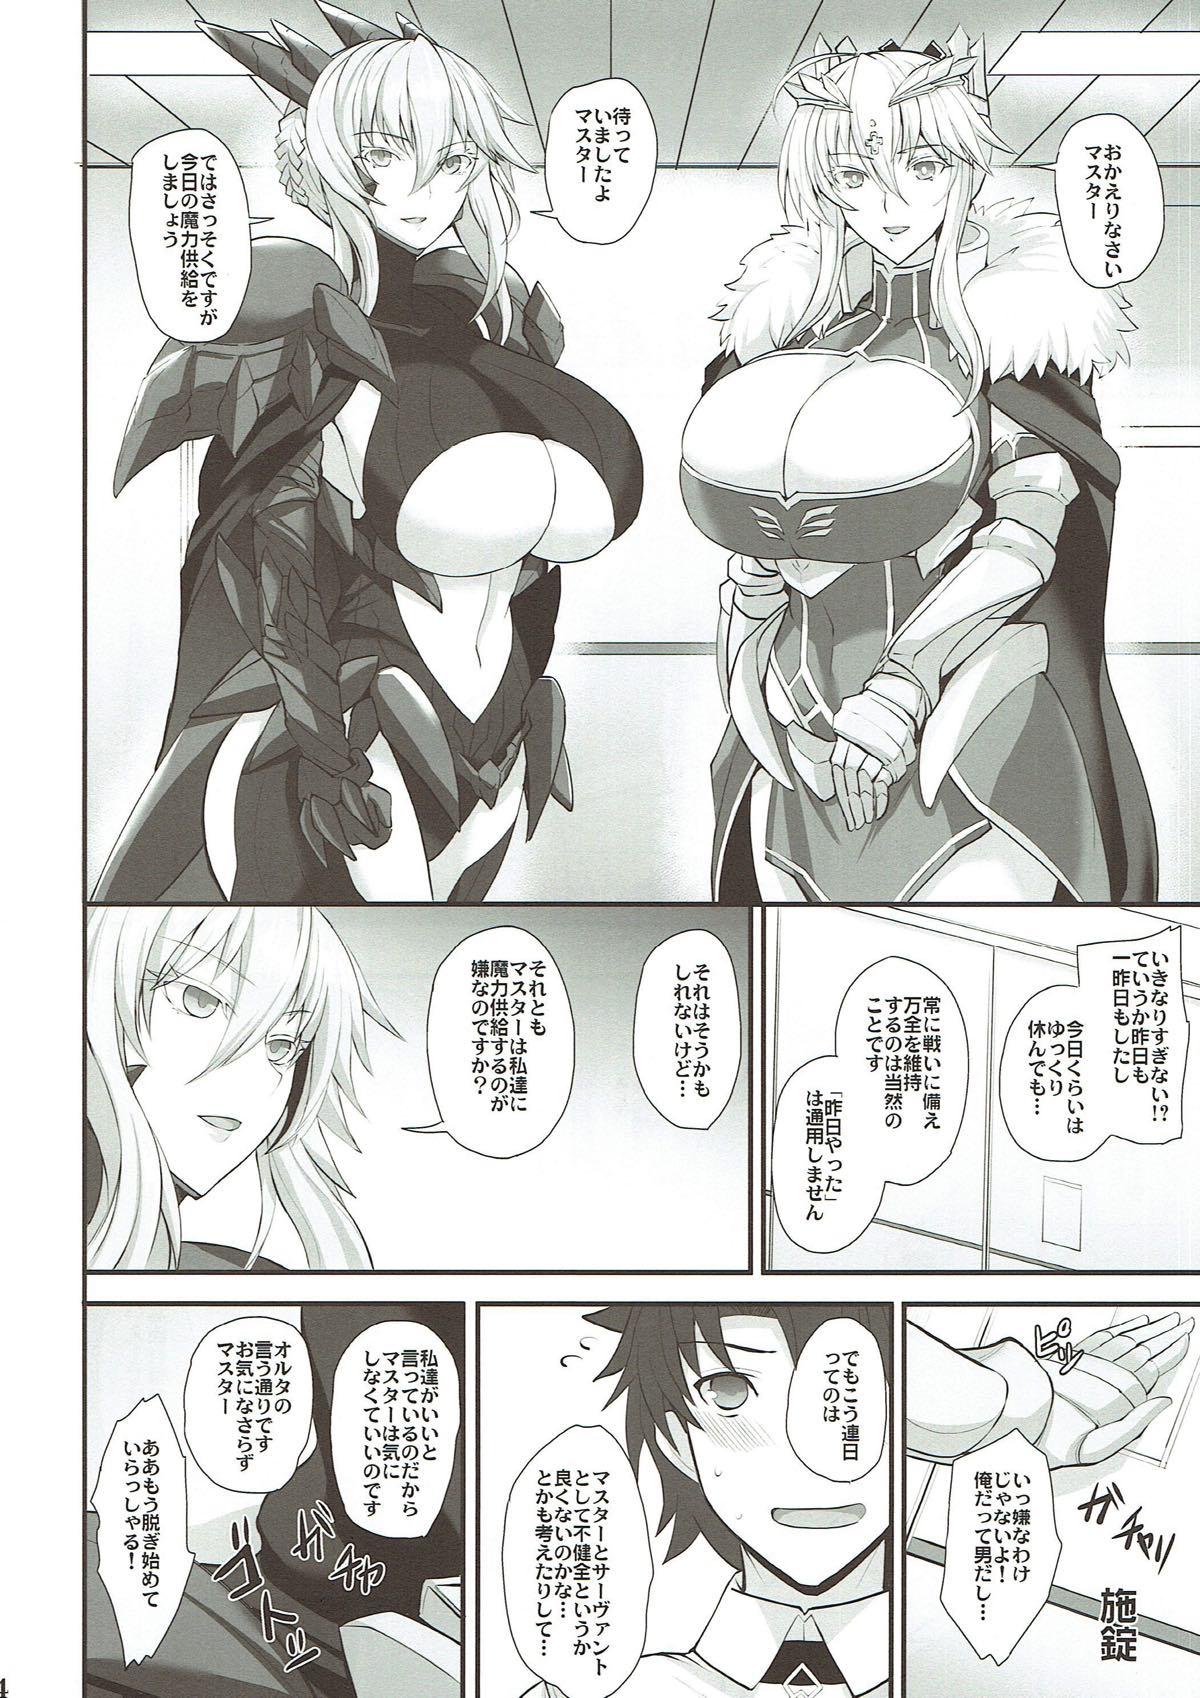 Glam Chichiue to Issho - Fate grand order High Definition - Page 4